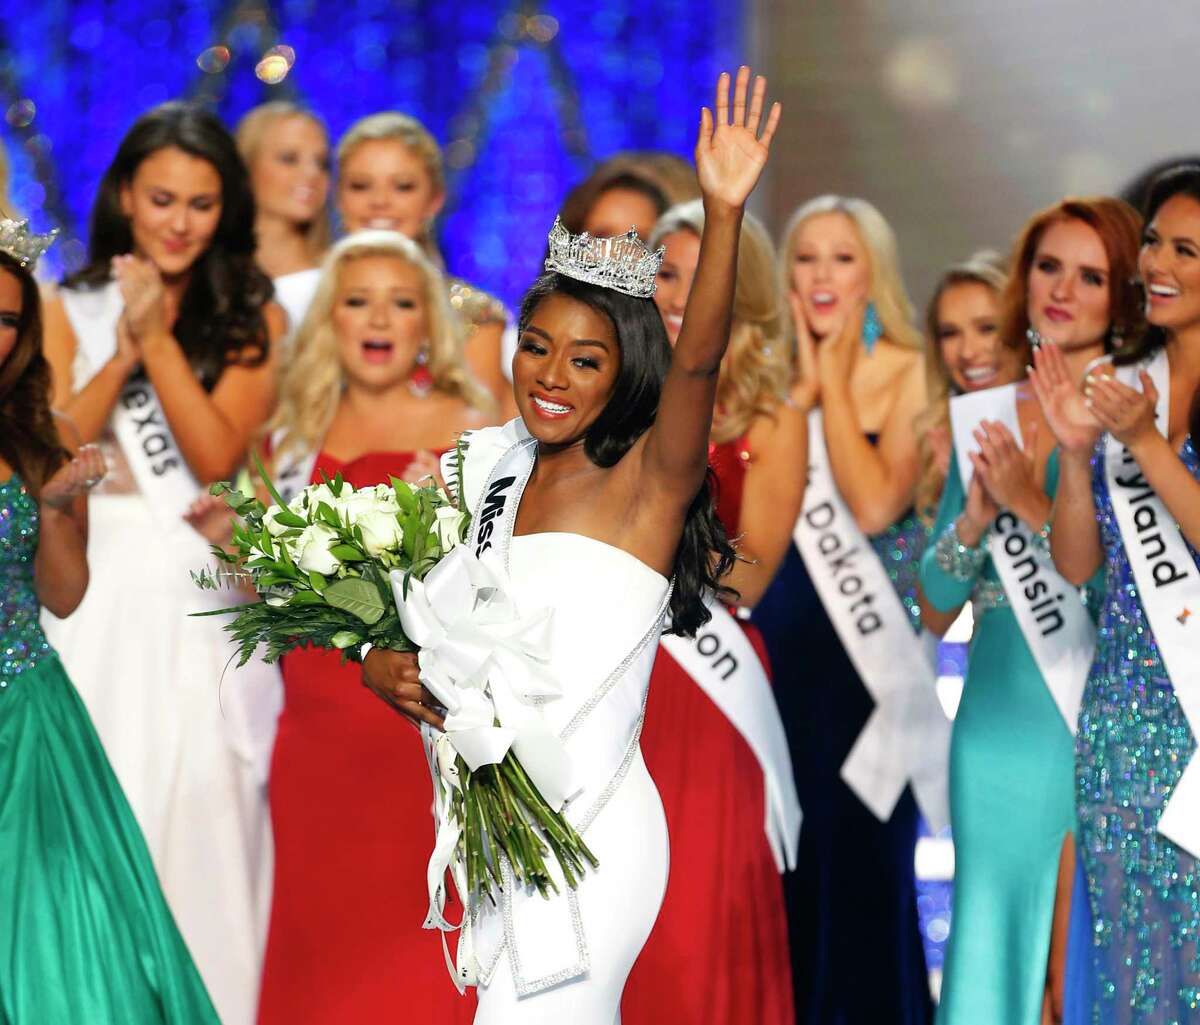 Nia Franklin reacts in September 2018 after being crowned Miss America, in Atlantic City, N.J. The 2020 pageant will be held at the Mohegan Sun Arena in eastern Connecticut. (AP Photo/Noah K. Murray, File)